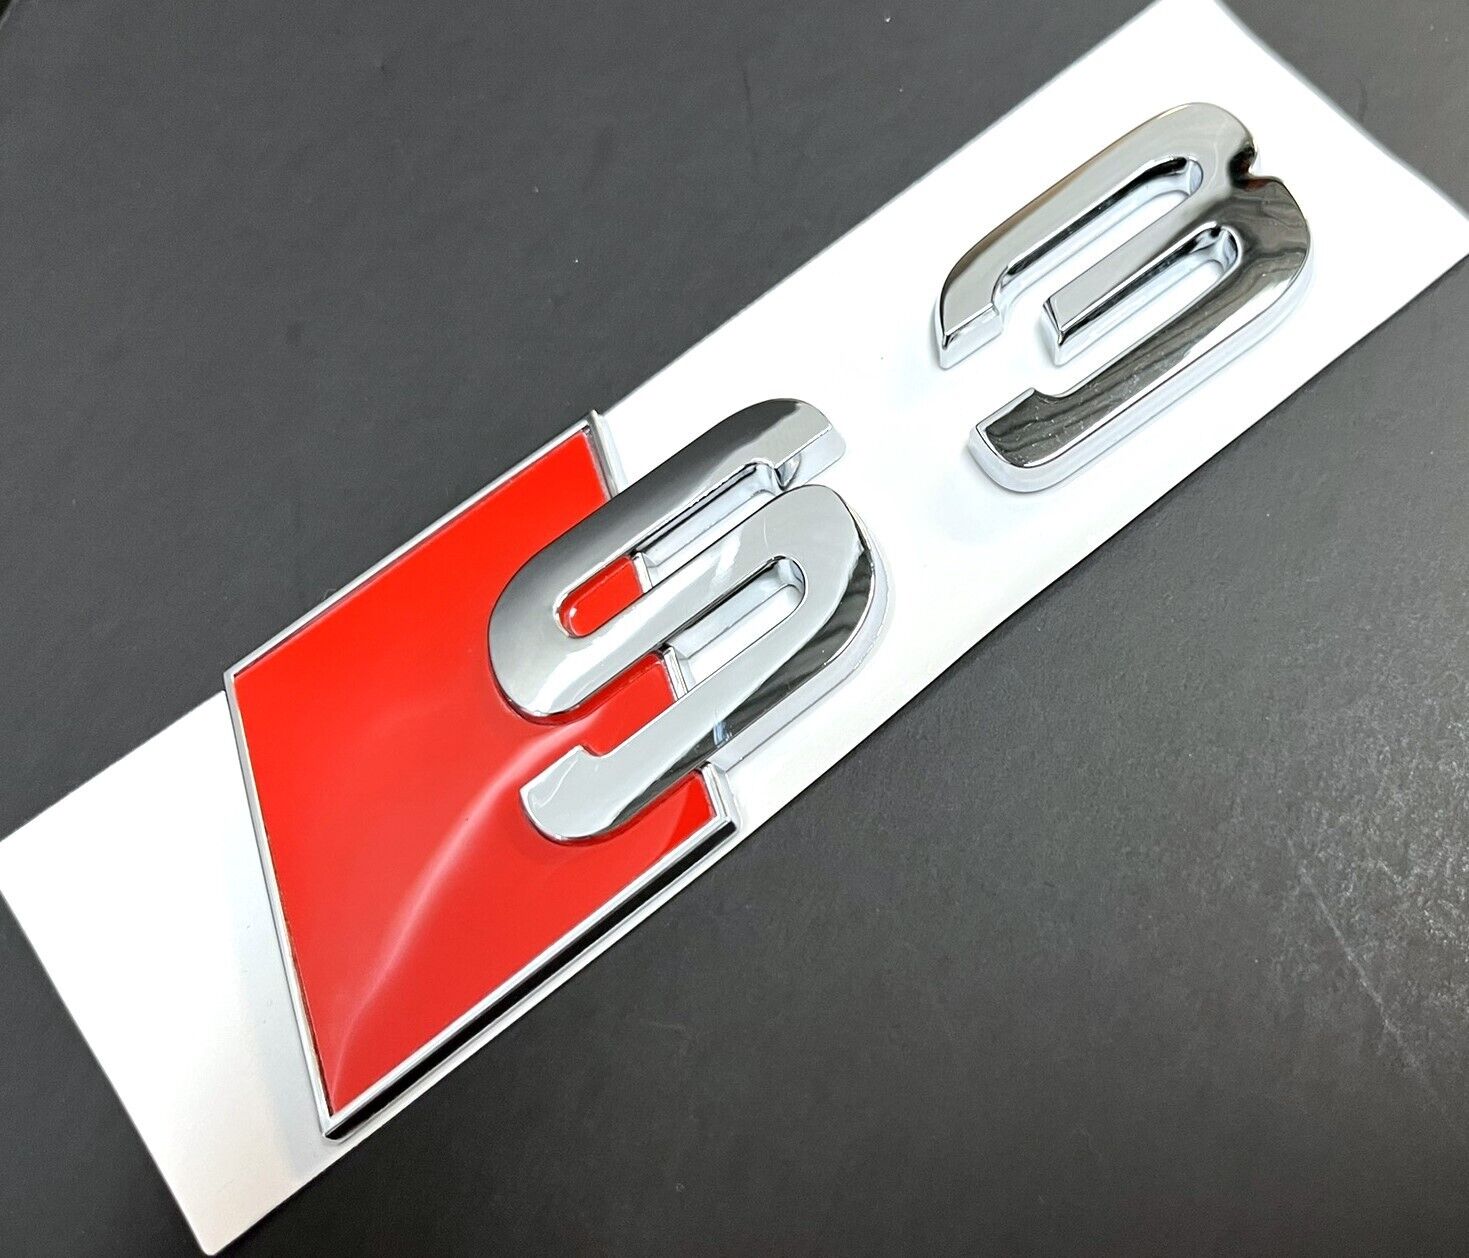 Chrome Audi S3 Rear Trunk Emblem Badge Decal Sticker S 3 Replacement